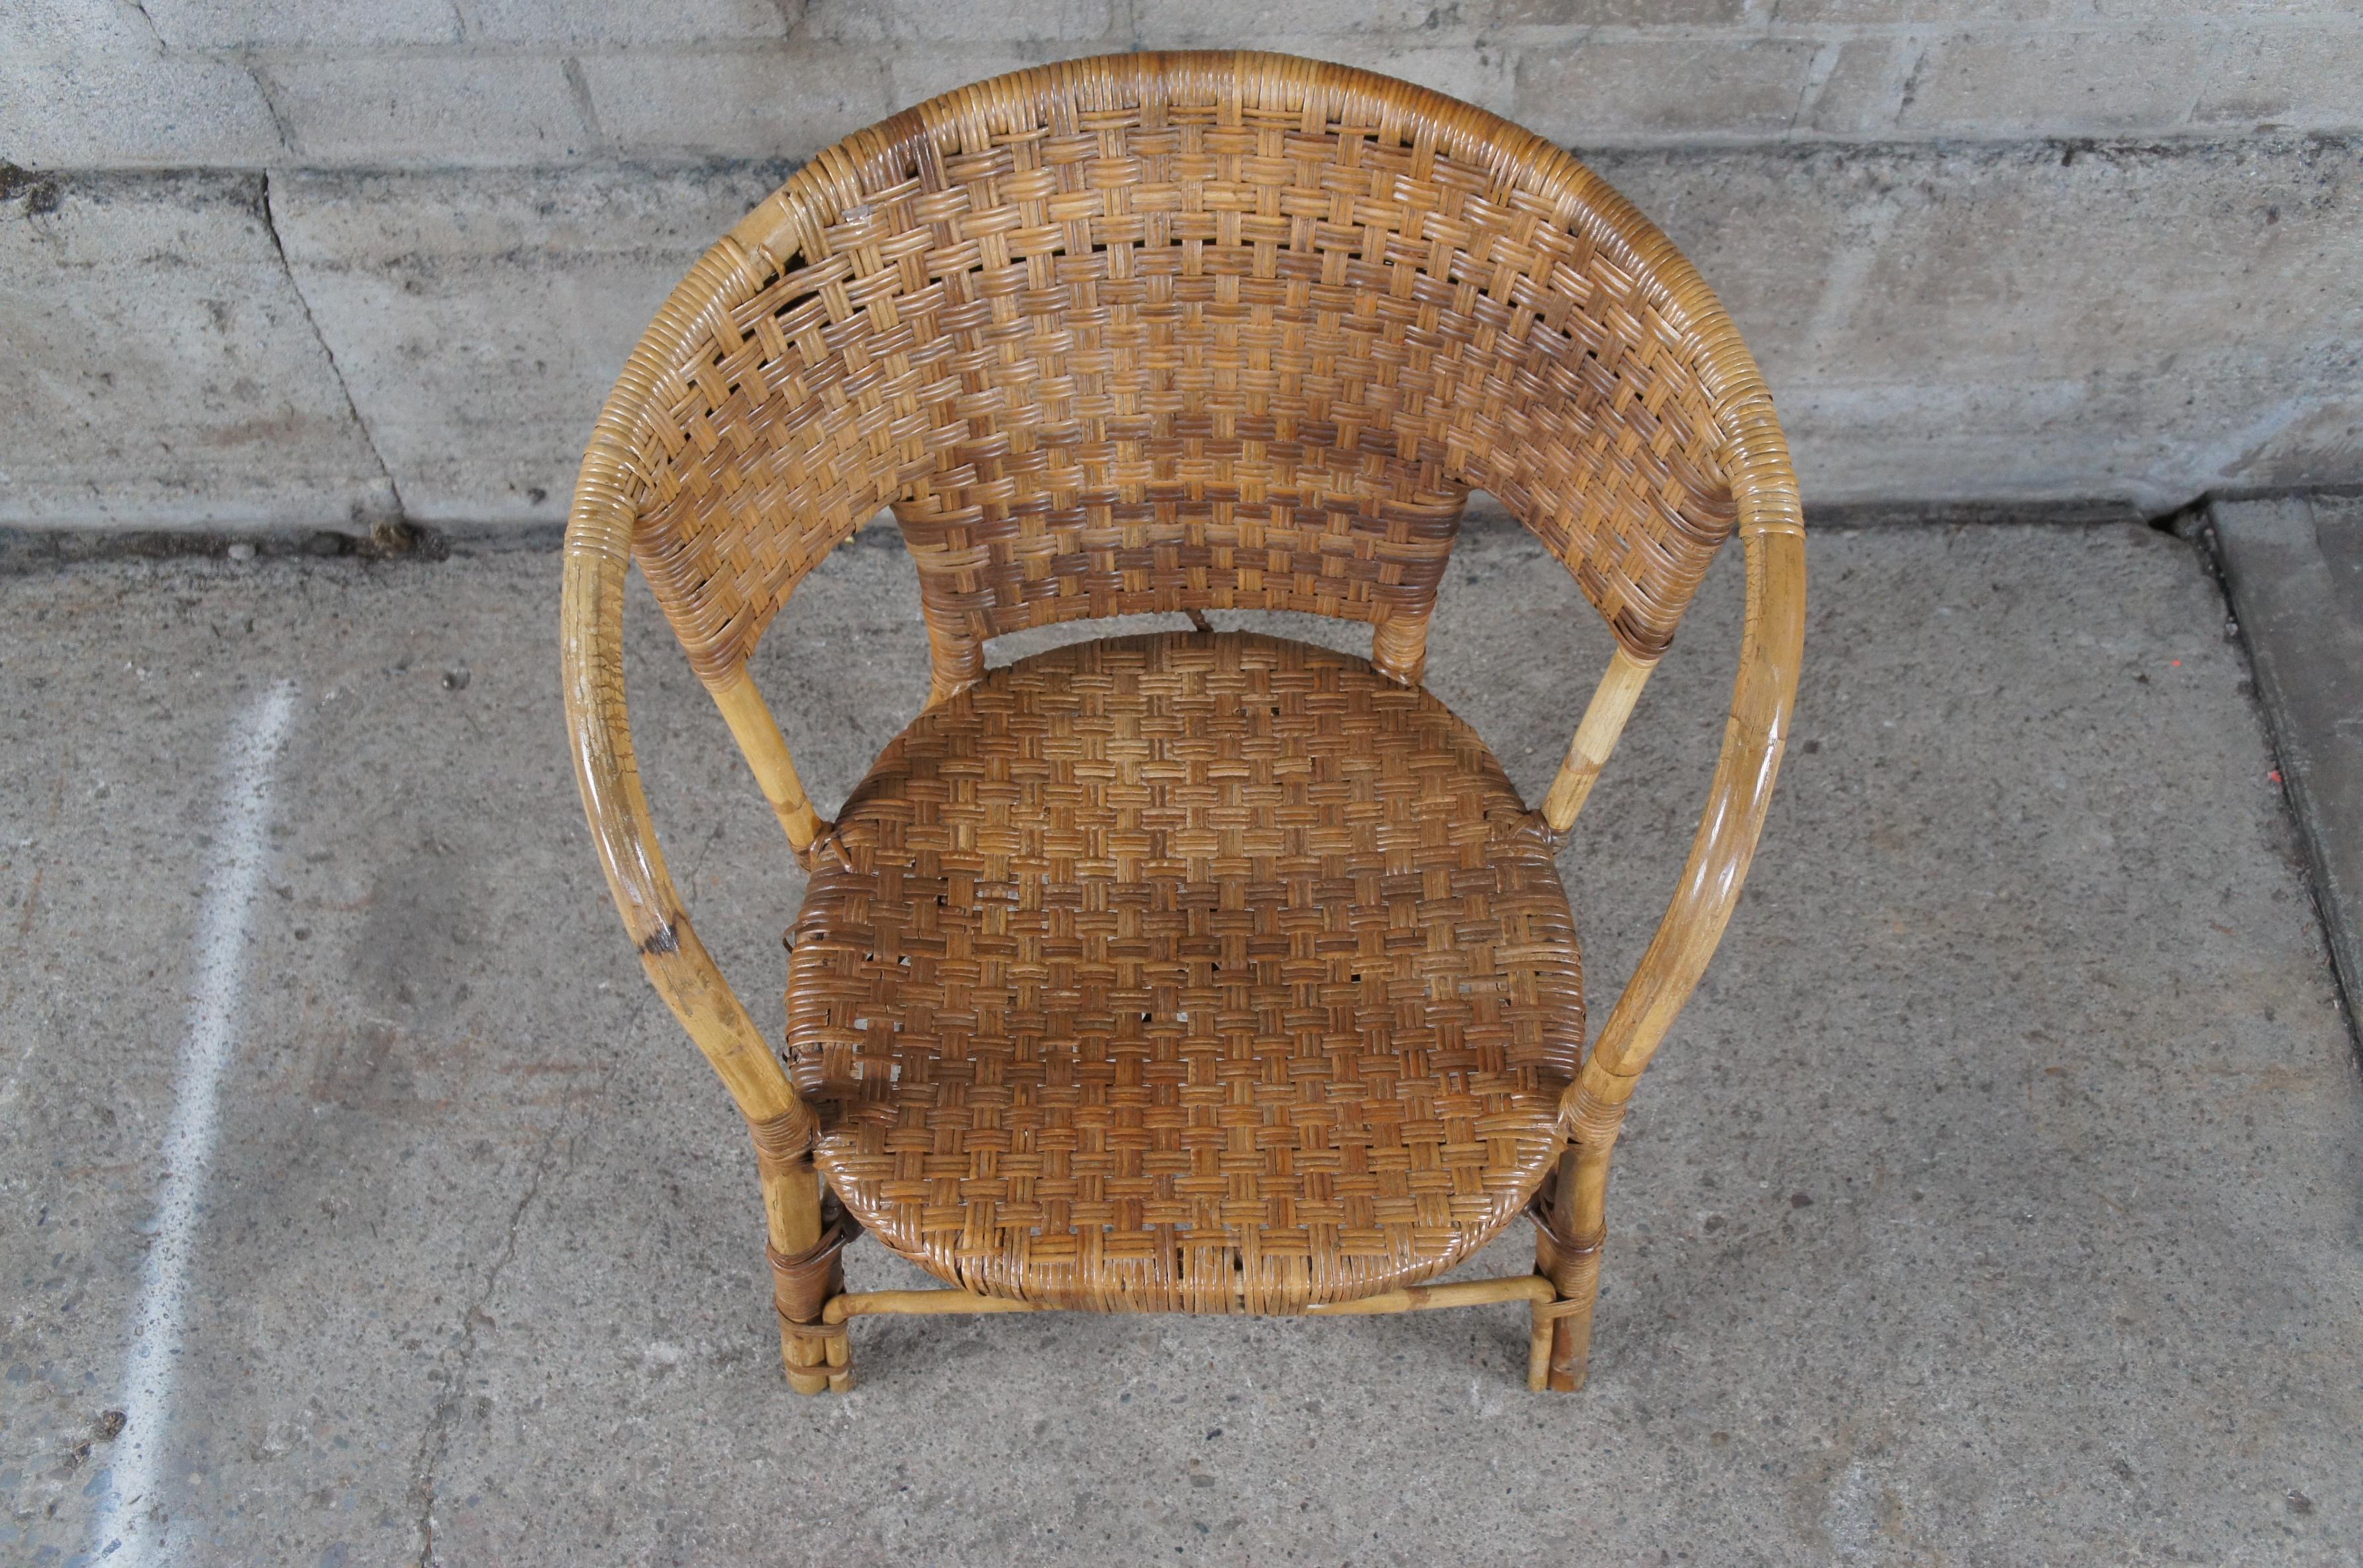 Antique Bentwood Bamboo Woven Wicker Rattan Arm Chair Boho Boheimian In Good Condition For Sale In Dayton, OH